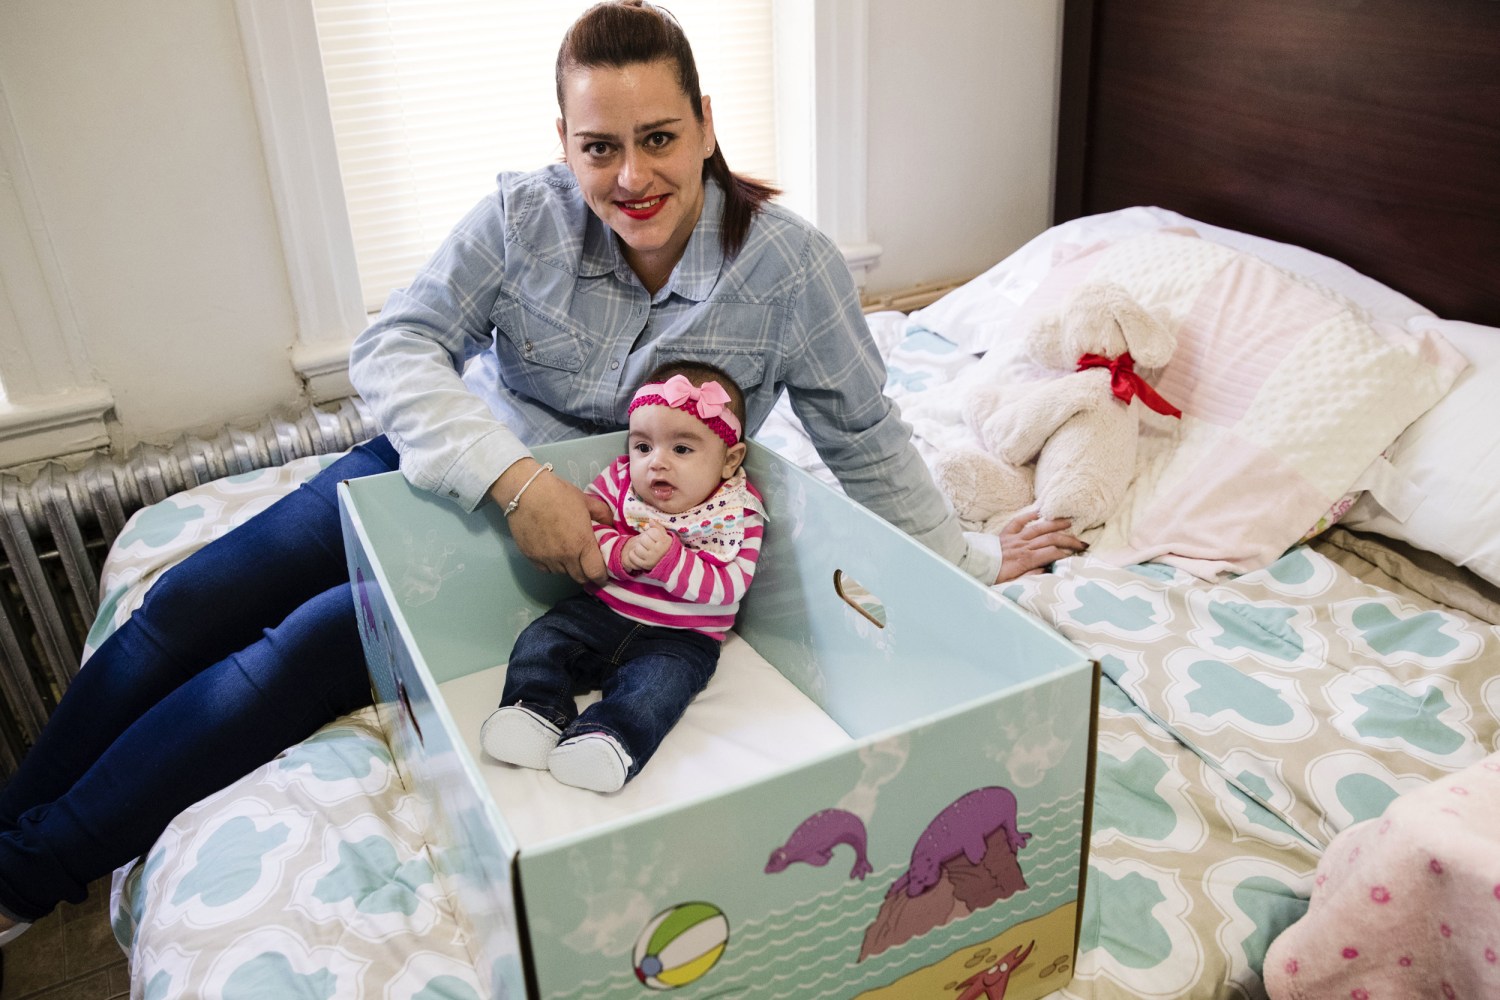 Hospitals Give Away Baby Boxes to Curb Infant Mortality